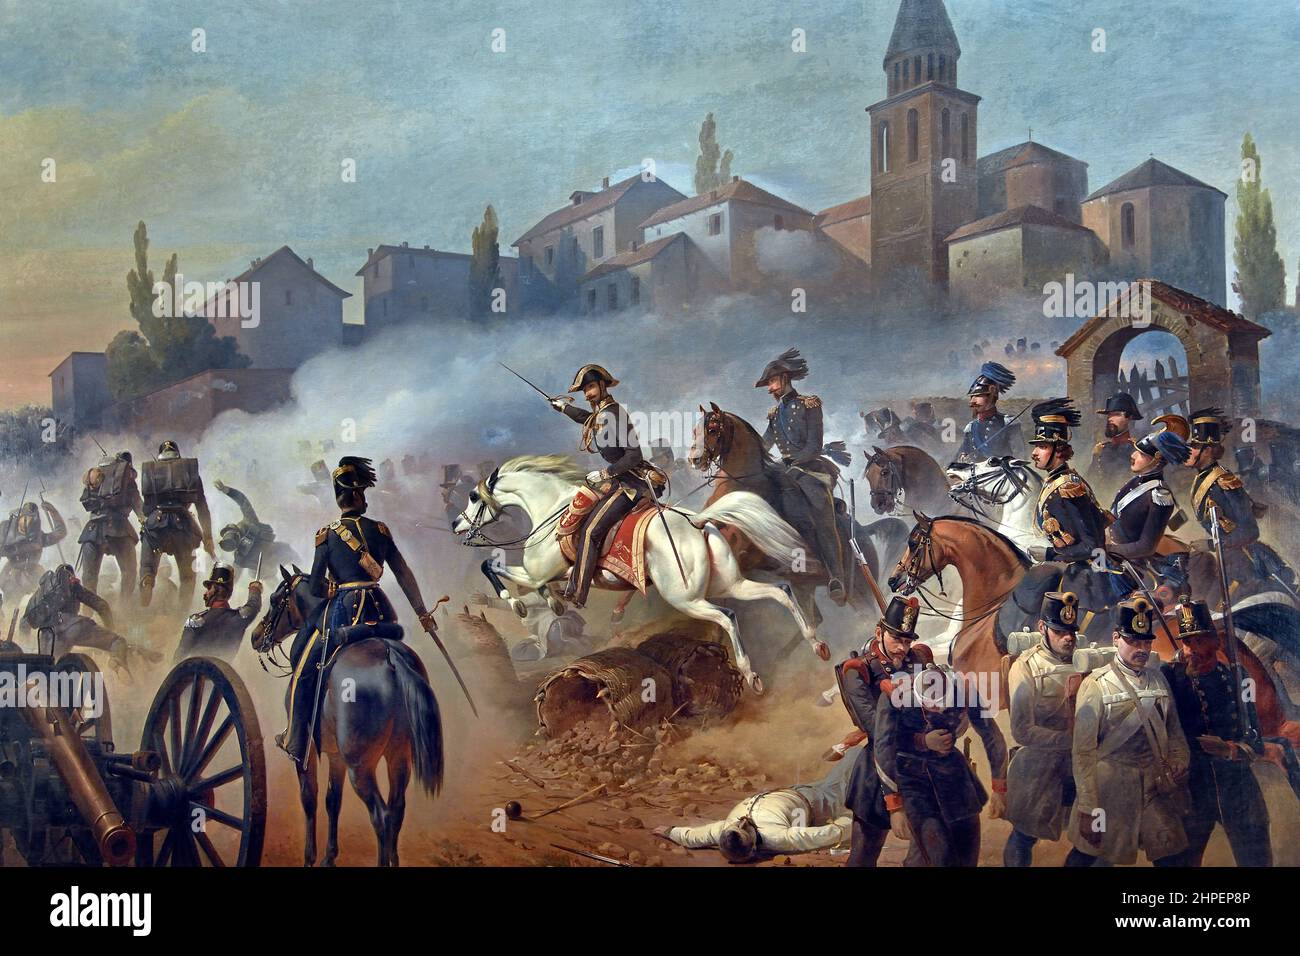 Battle of Sommacampagna which took place on 23 July 1848 immediately before the battle of Custoza, in the context of the first war of independence.First war of independence, which took place in Sommacampagna on April 30, 1848, on the occasion of the battle of Pastrengo (On the morning of the 30th while the attack of Pastrengo and Bussolengo began, Radetzky tried to stop the Piedmontese army by Sona and Sommacampagna, but was rejected by the Aosta Brigade. Painting by Cerruti Bauduc. Stock Photo